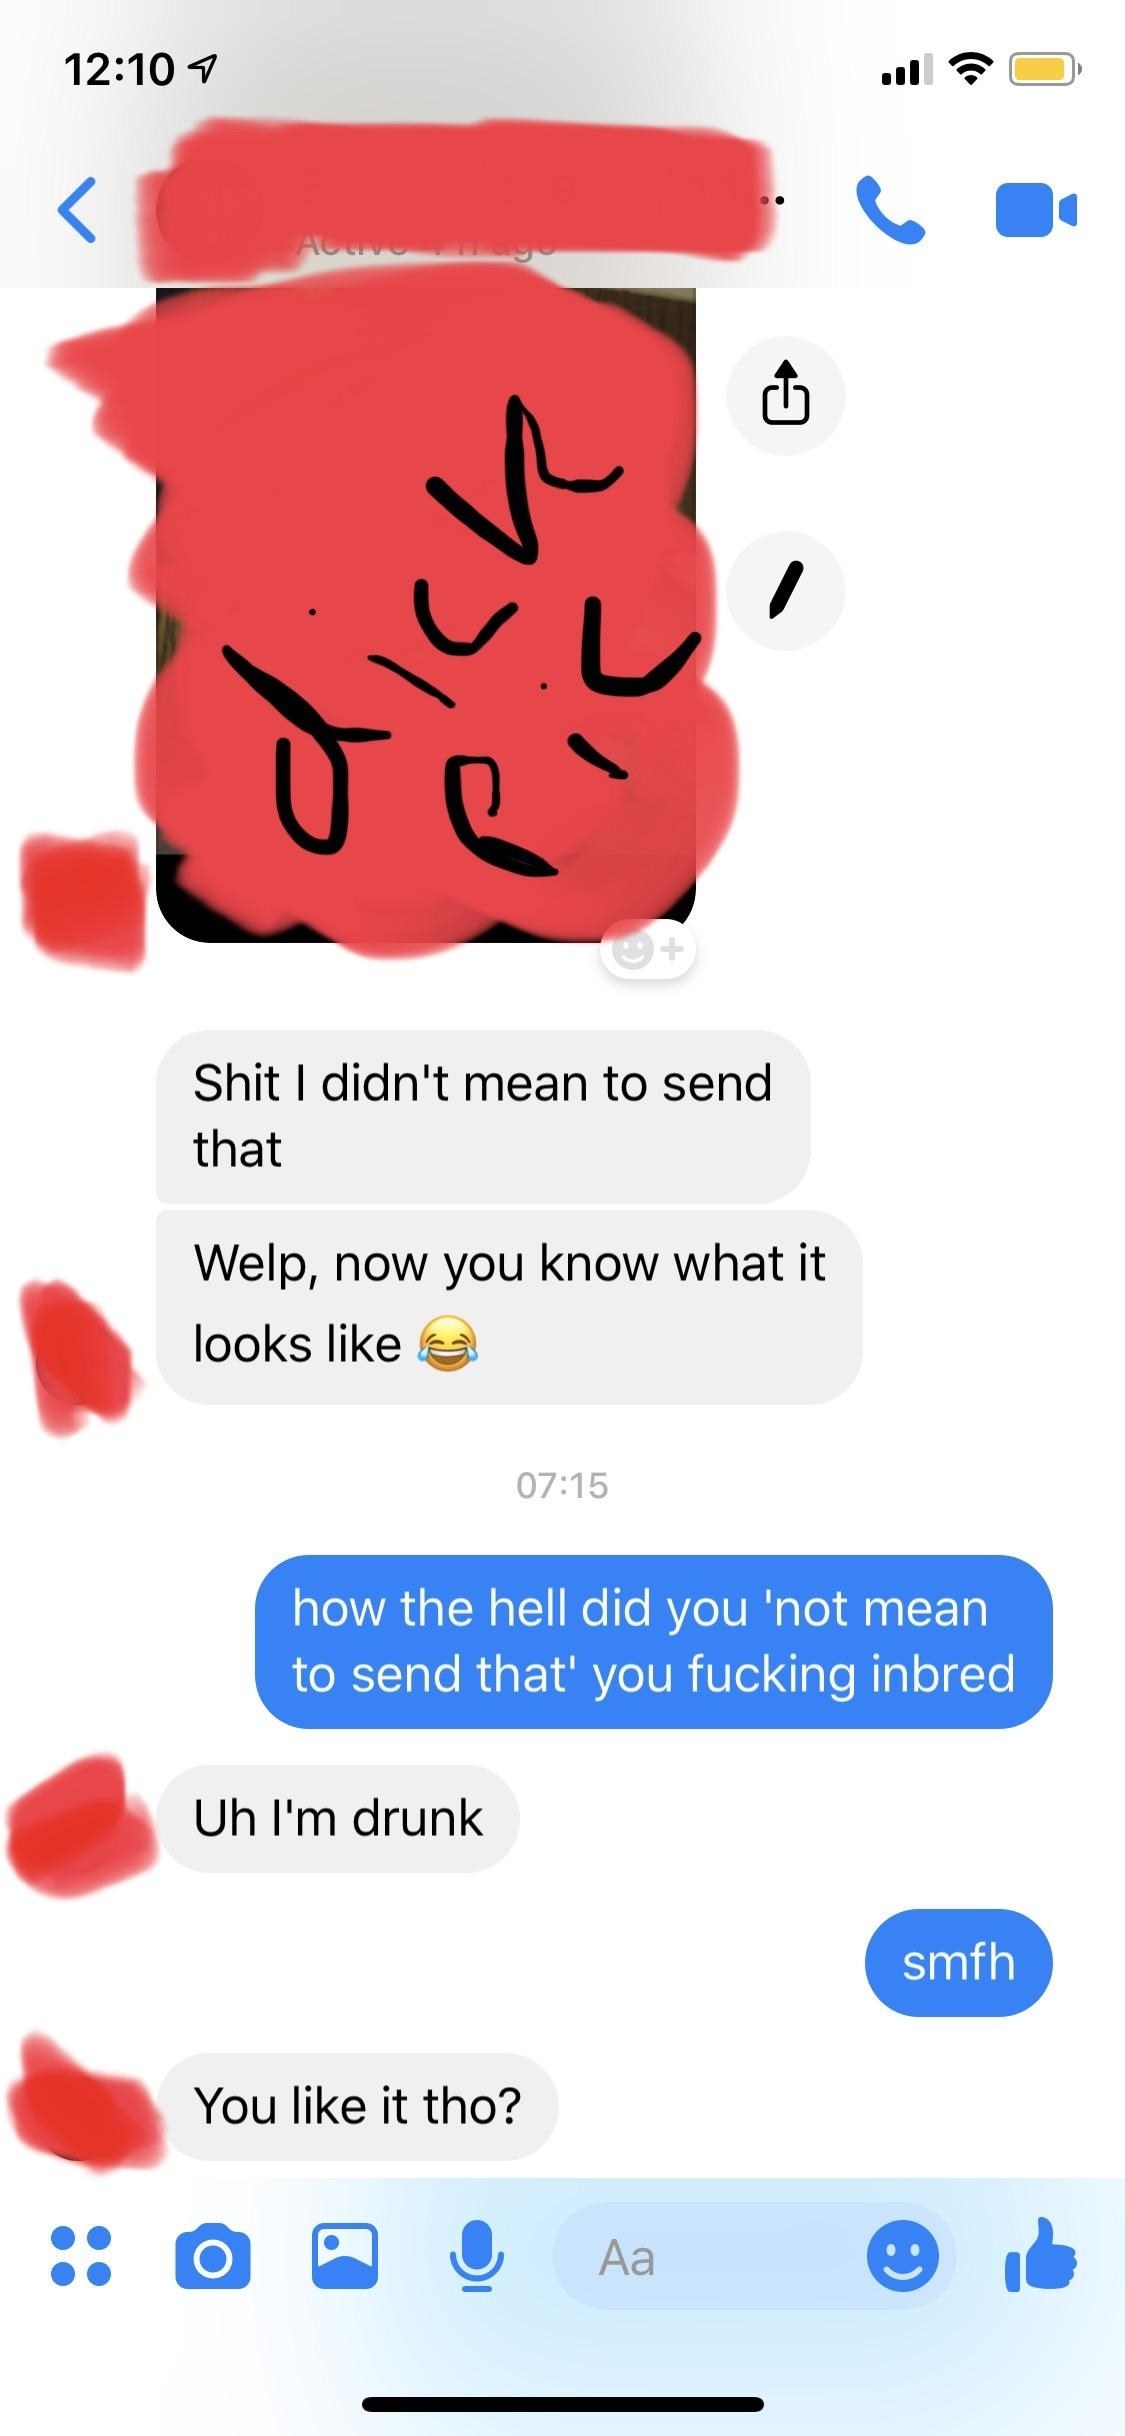 Person says they didn&#x27;t mean to send the dick pic, and when asked how they didn&#x27;t mean to send it, they say they&#x27;re drunk—&quot;You like it though?&quot;